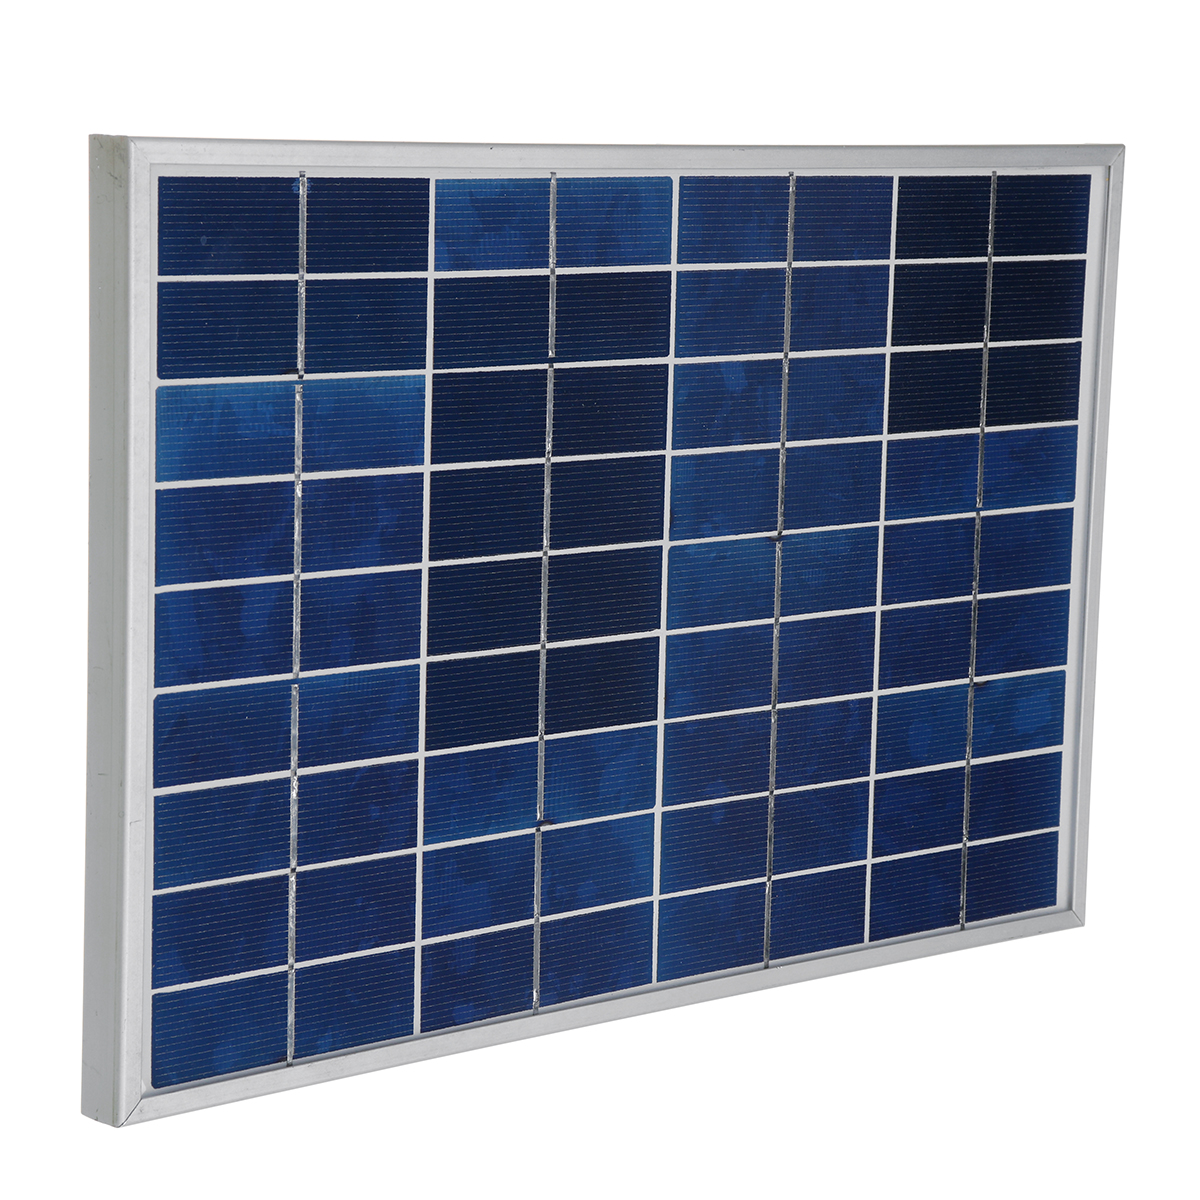 Solar-Panel-Power-System-Complete-Kit-18V-30W-Solar-Panel-60A-Charger-USB-Controller-1000W-Solar-Inv-1837386-9